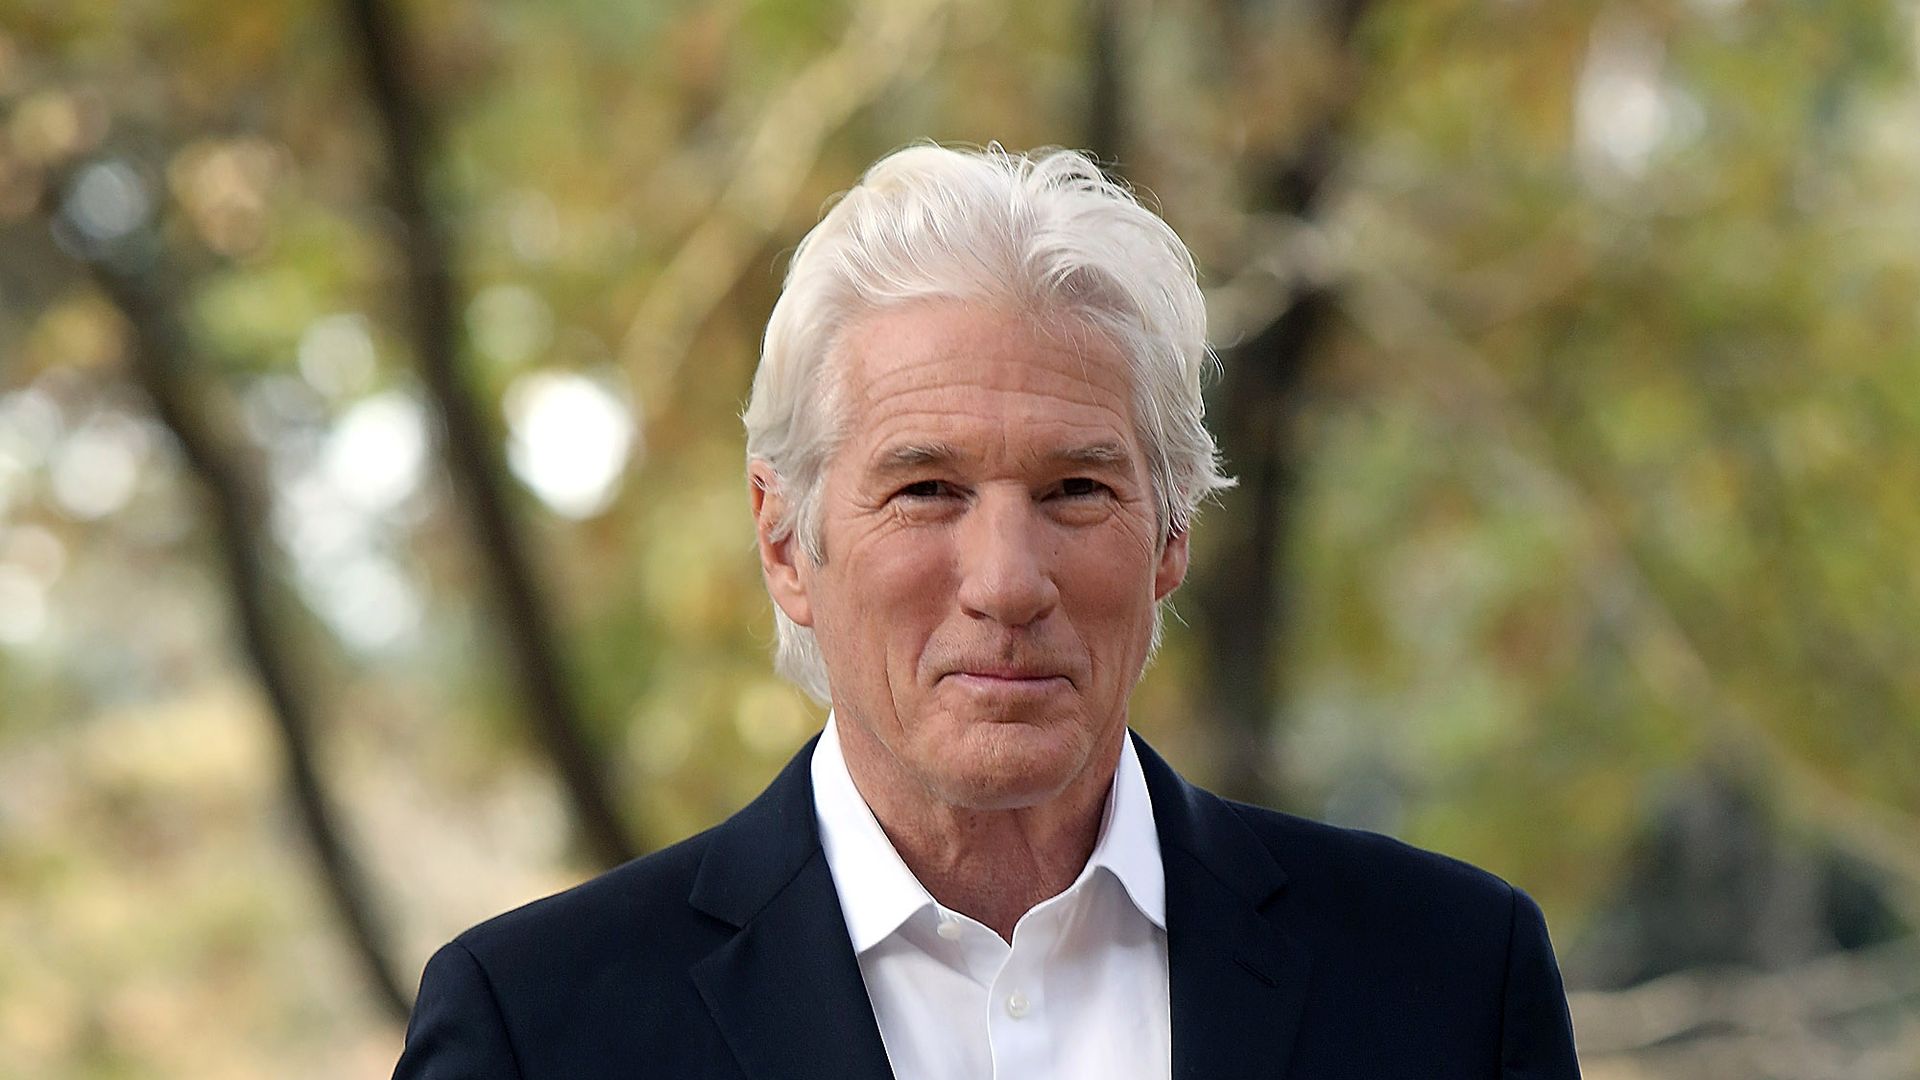 Meet Richard Gere's 3 sons—their family life in photos